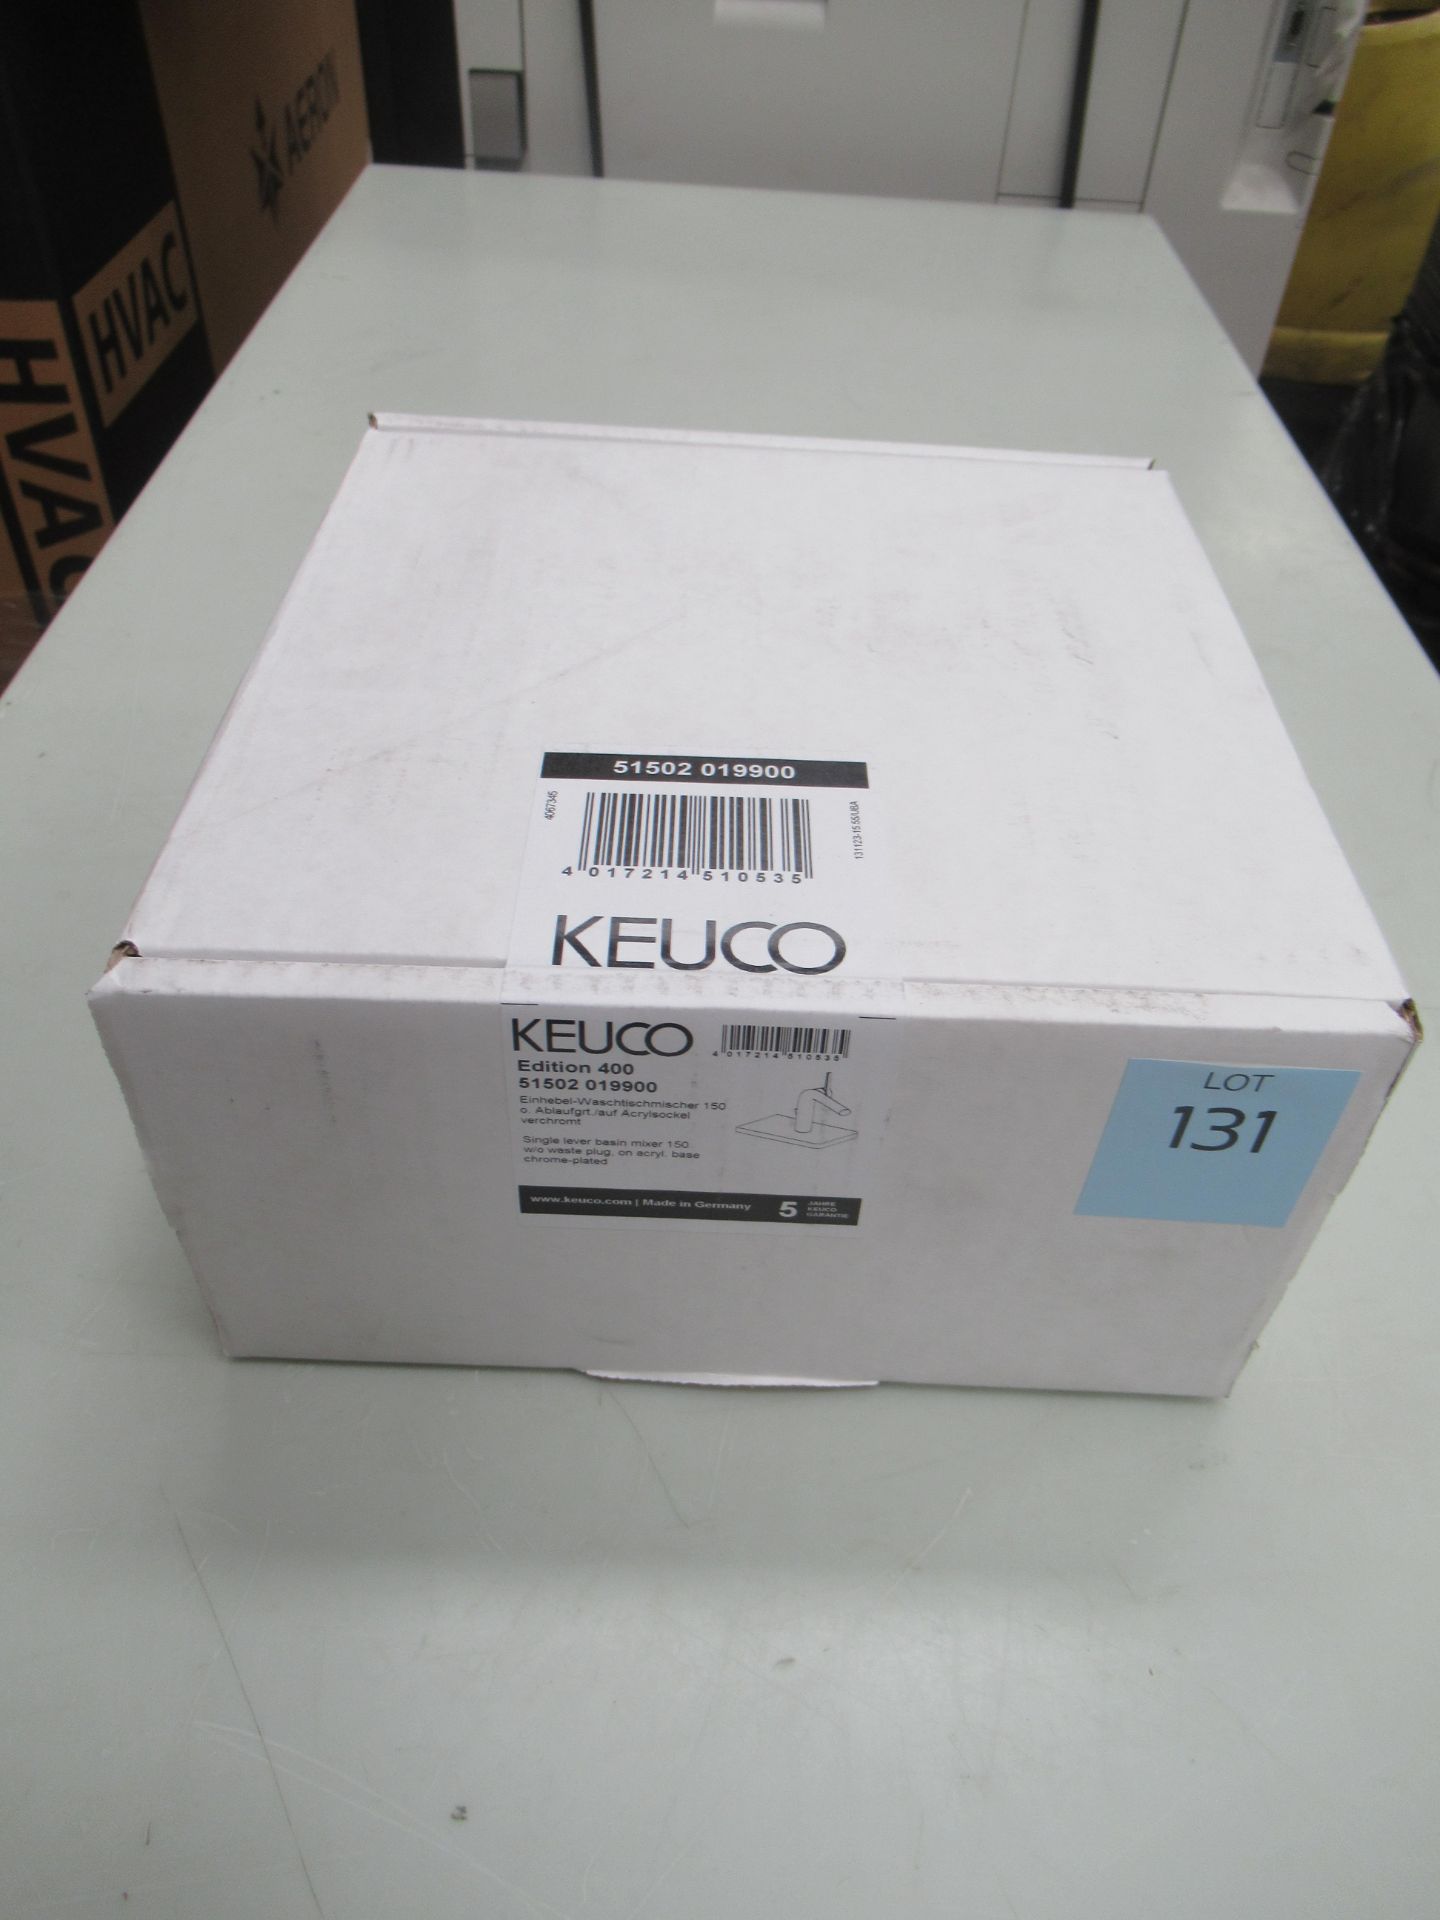 A Keuco Edition 400 Single Lever Basin Mixer 150-Tap, Chrome Plated, P/N 51502-019900